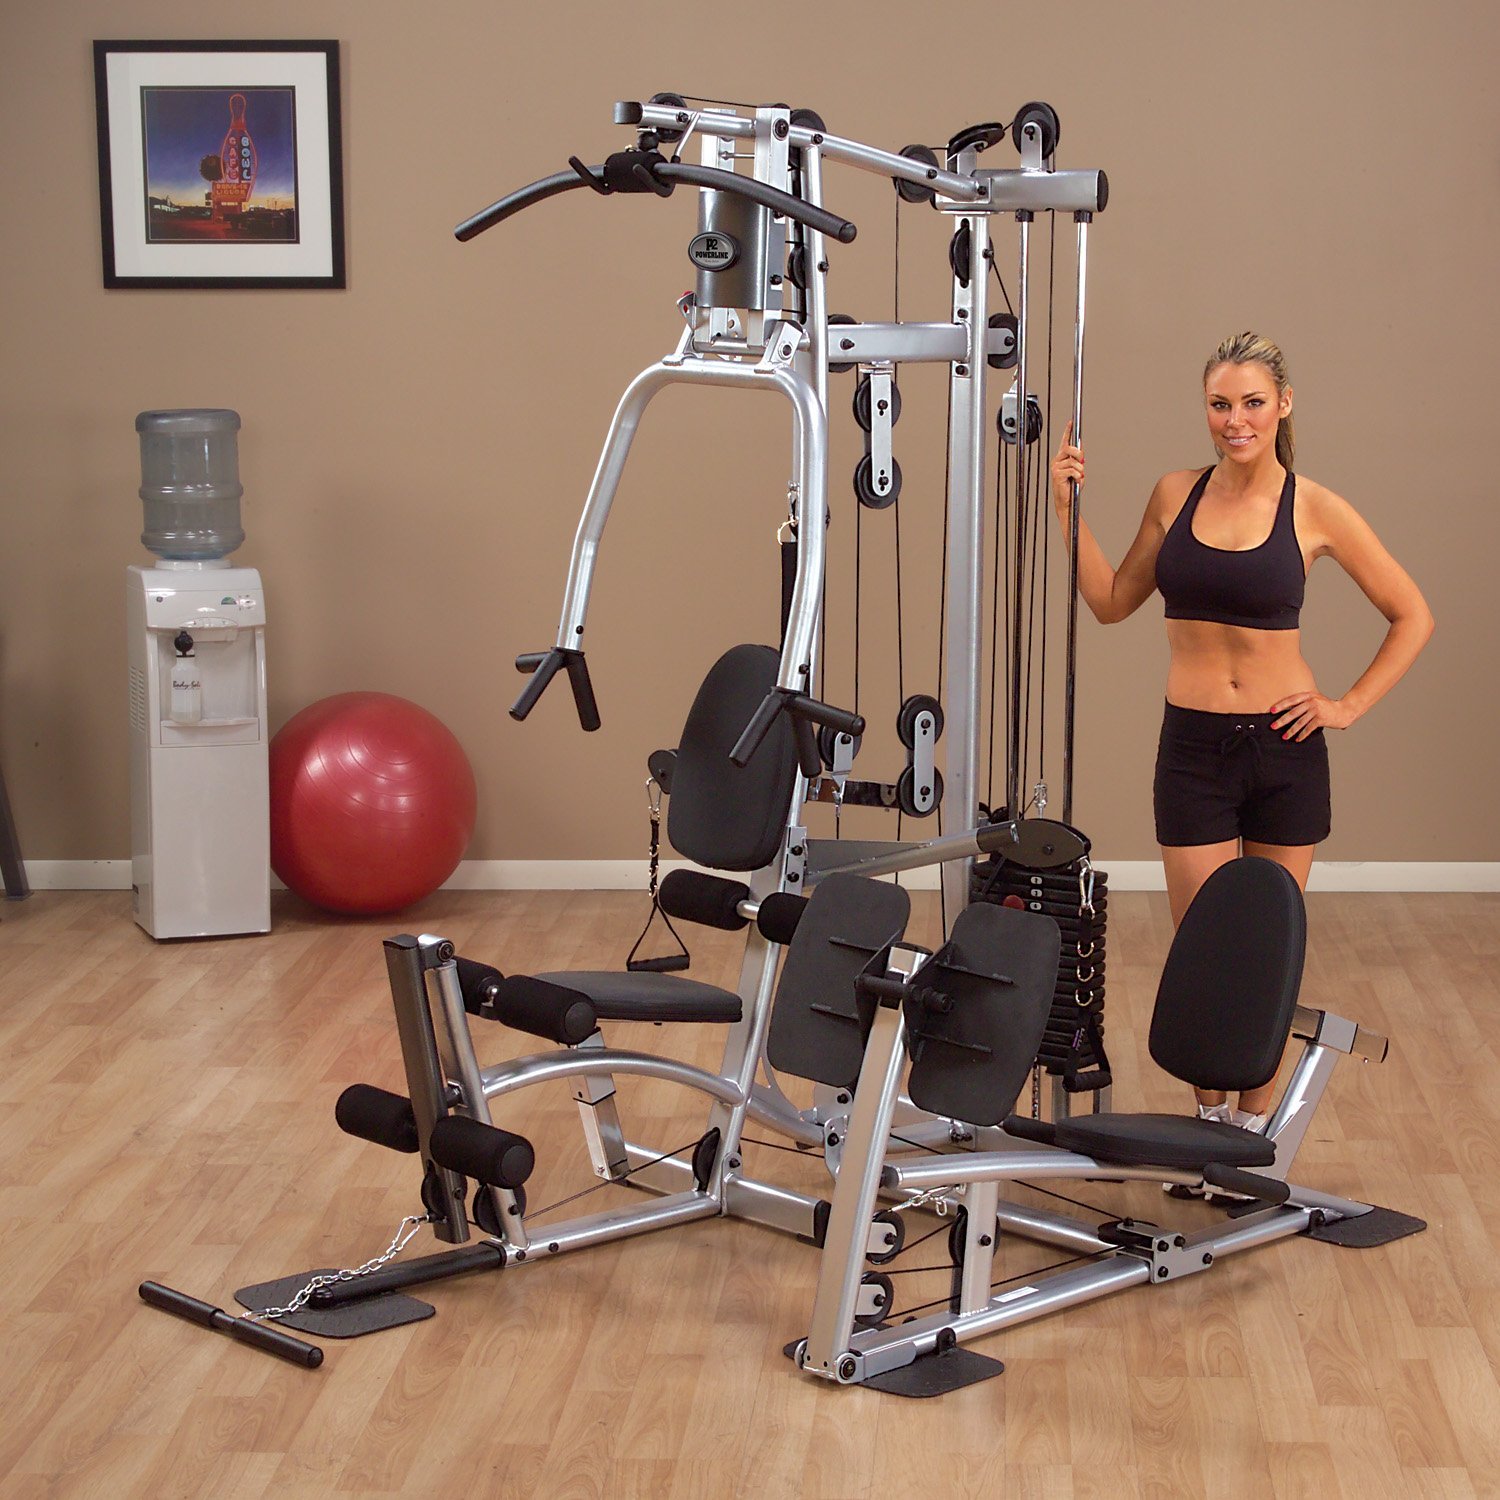 Top 10 Best Exercise Machines You Should Invest In - Wiproo